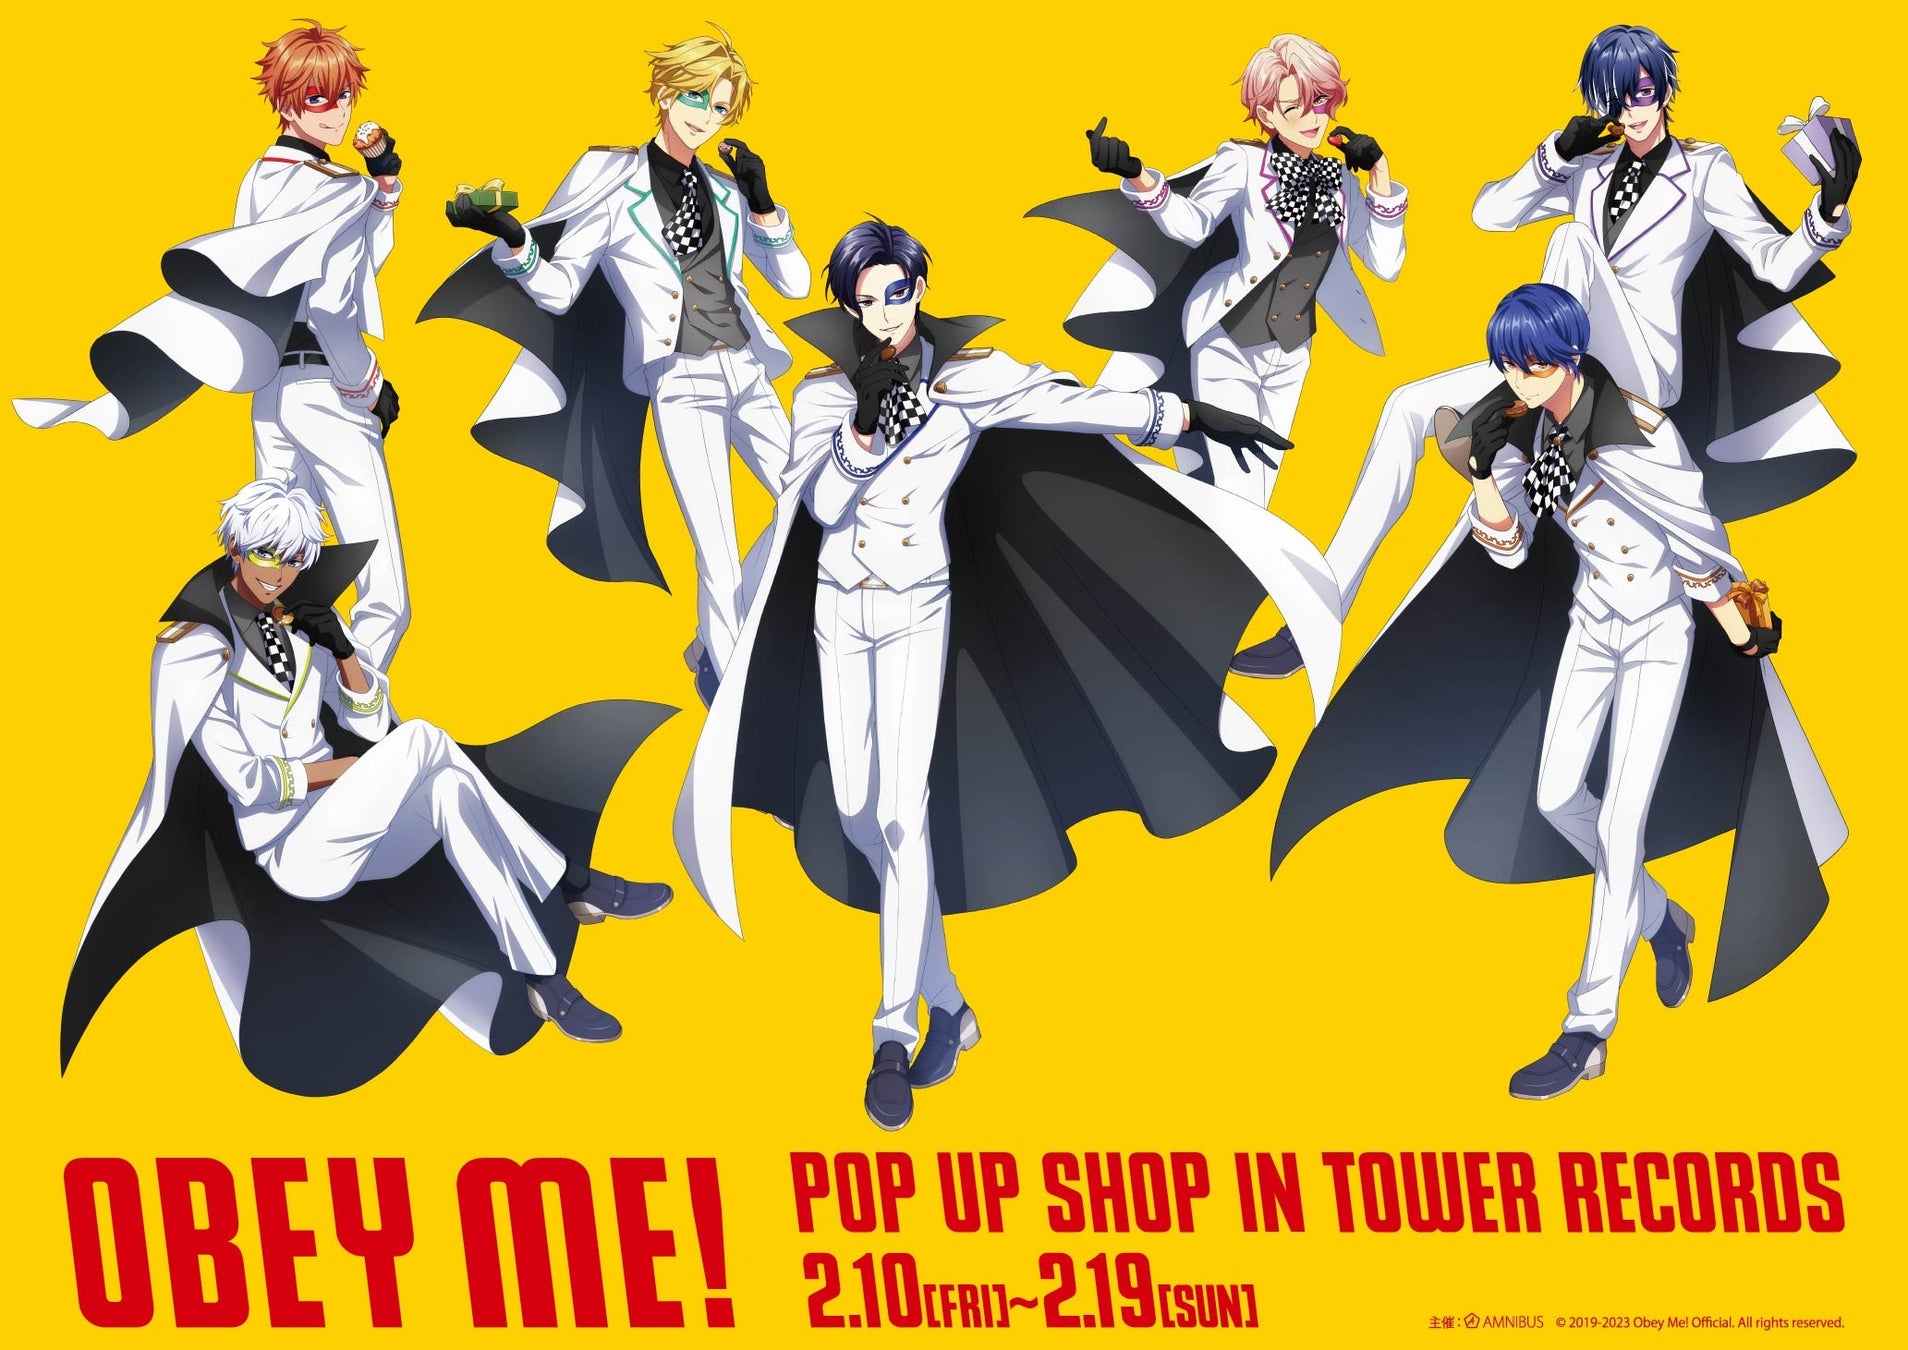 『Obey Me!』のイベント「Obey Me! POP UP SHOP in TOWER RECORDS」の開催が決定！